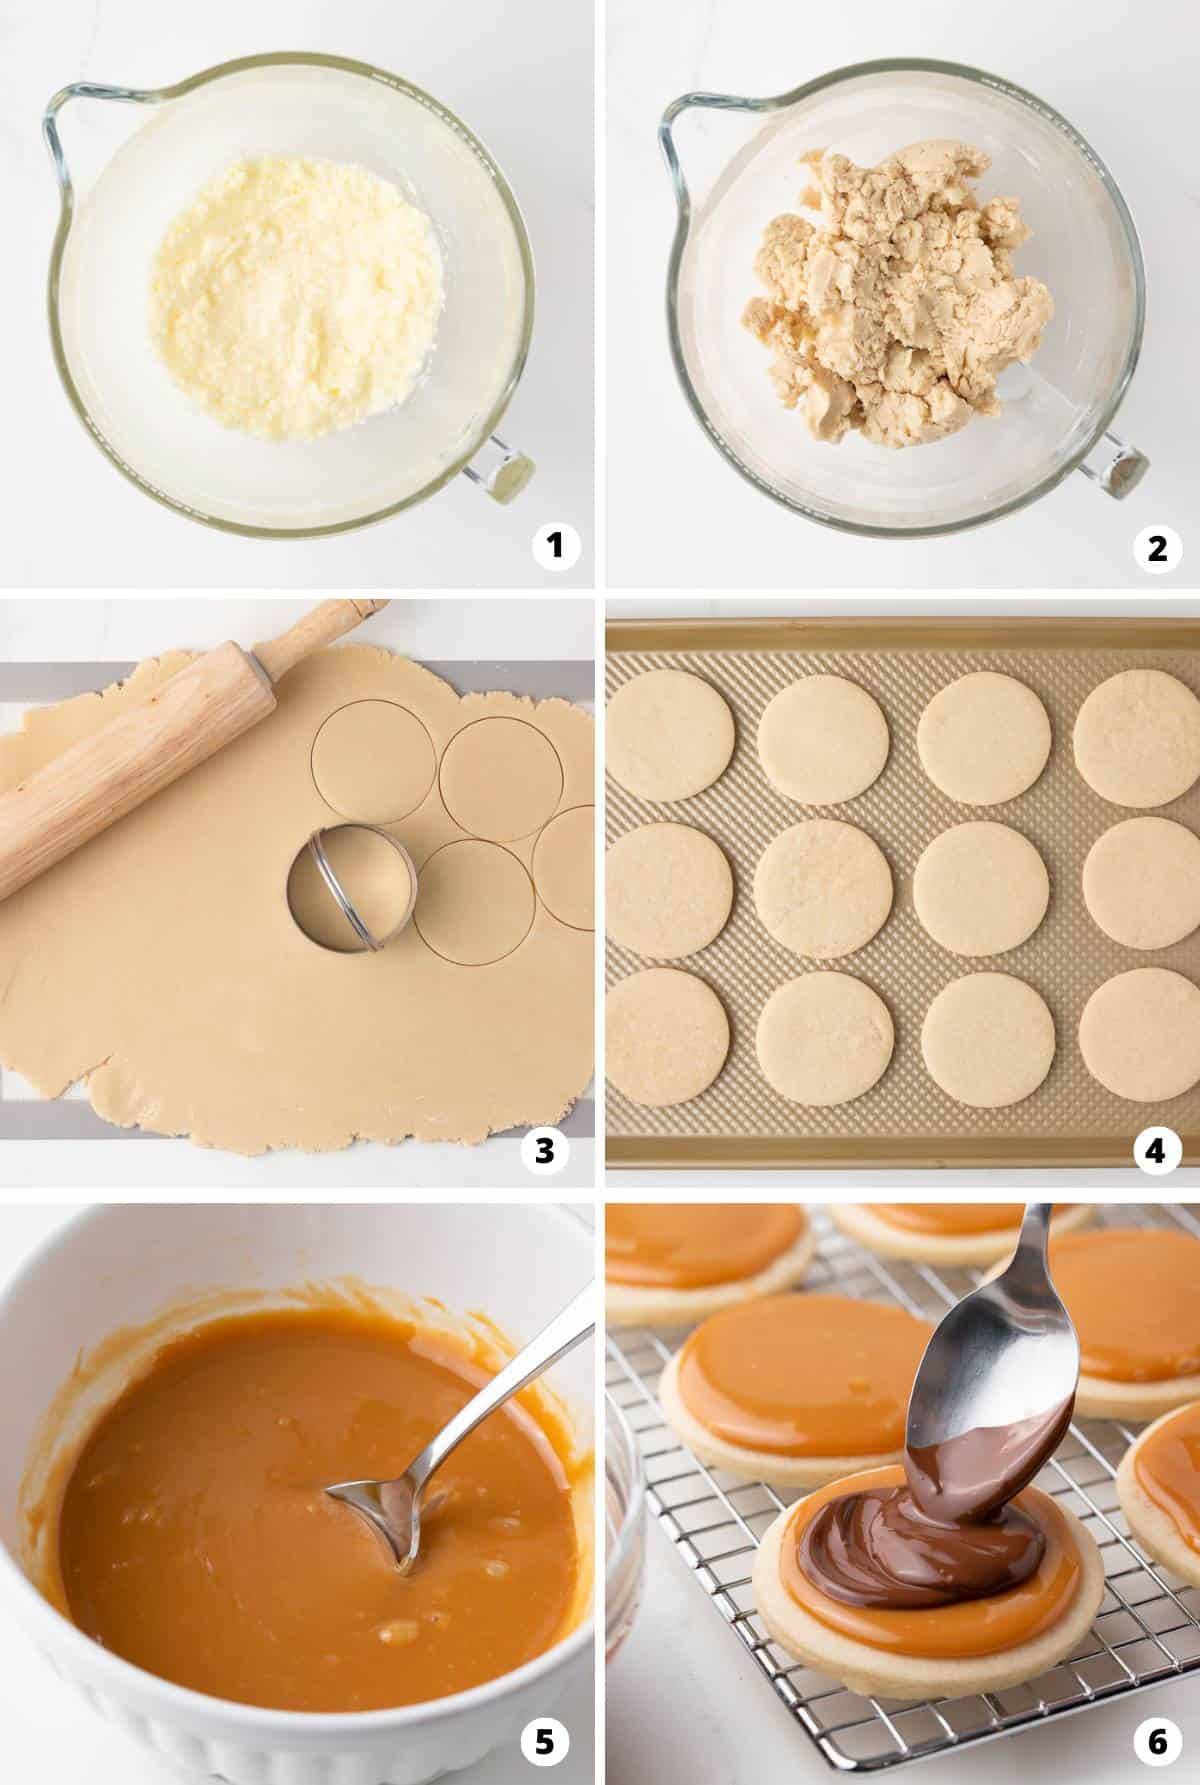 Showing how to make twix cookies in a 6 step collage.